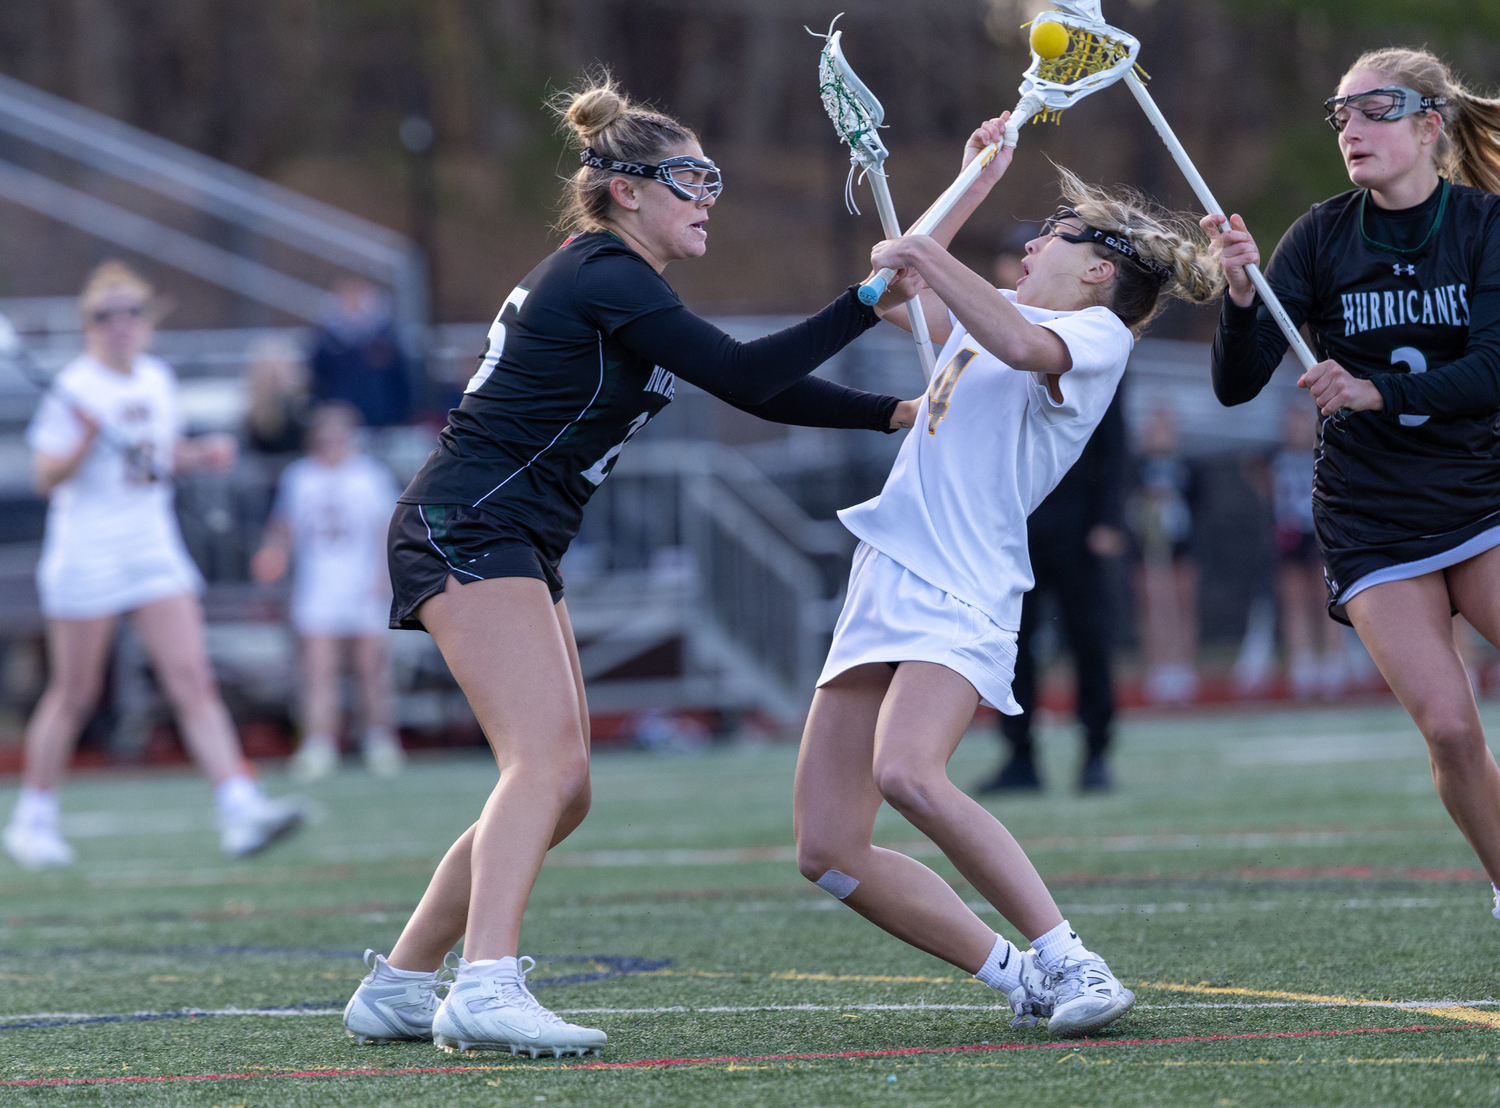 Senior defender Gabby  Wendel checks an opponent in an attempt to force a turnover. RON ESPOSITO